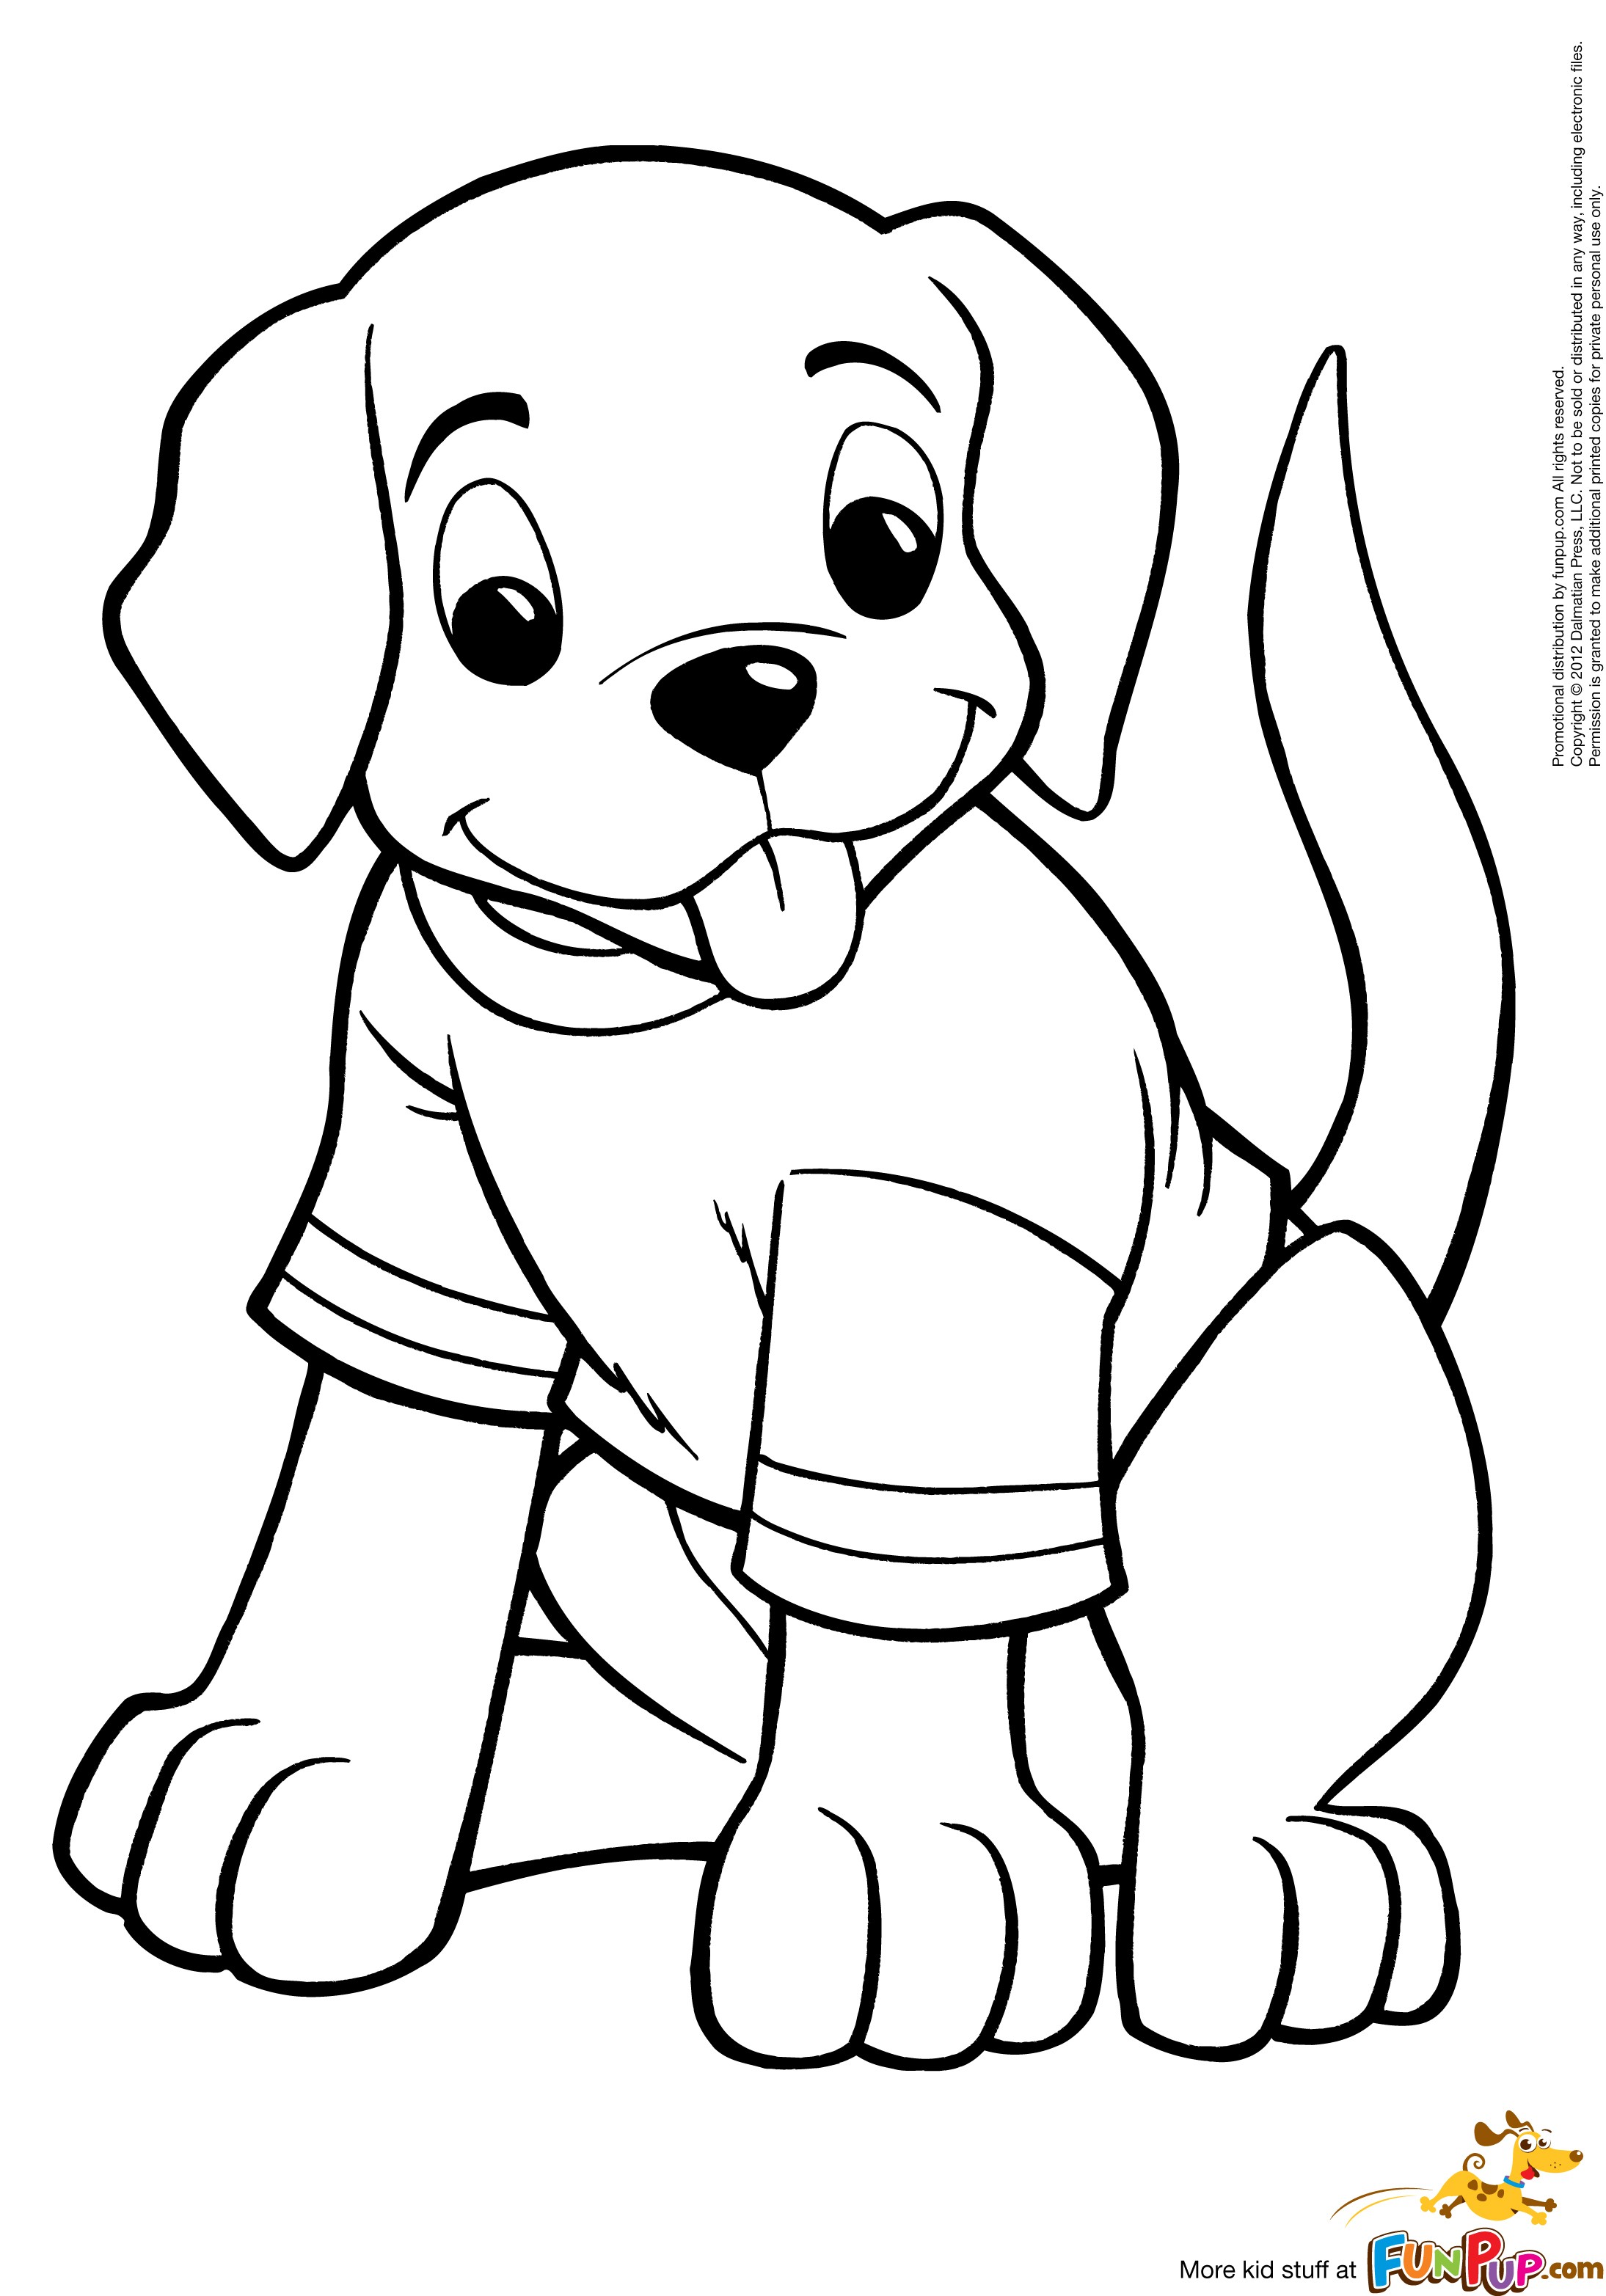 Printable Puppy Coloring Pages : Coloring - Kids Coloring Pages